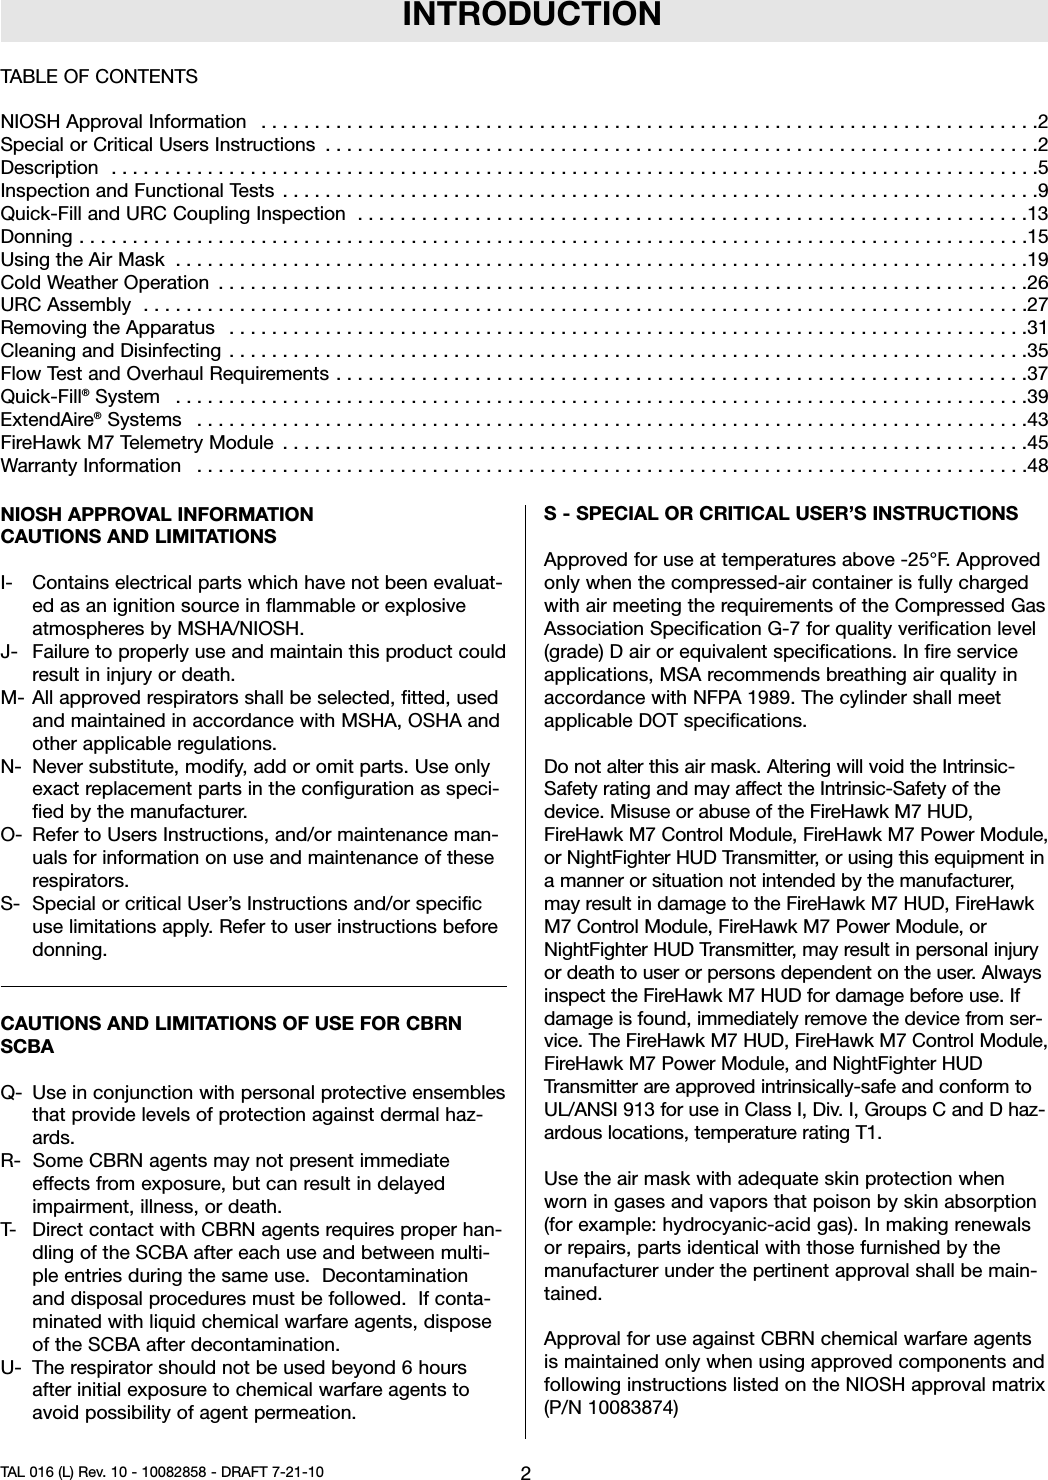 INTRODUCTIONNIOSH APPROVAL INFORMATIONCAUTIONS AND LIMITATIONSI- Contains electrical parts which have not been evaluat-ed as an ignition source in flammable or explosiveatmospheres by MSHA/NIOSH.J- Failure to properly use and maintain this product couldresult in injury or death.M- All approved respirators shall be selected, fitted, usedand maintained in accordance with MSHA, OSHA andother applicable regulations.N- Never substitute, modify, add or omit parts. Use onlyexact replacement parts in the configuration as speci-fied by the manufacturer.O- Refer to Users Instructions, and/or maintenance man-uals for information on use and maintenance of theserespirators.S- Special or critical User’s Instructions and/or specificuse limitations apply. Refer to user instructions beforedonning.CAUTIONS AND LIMITATIONS OF USE FOR CBRNSCBAQ- Use in conjunction with personal protective ensemblesthat provide levels of protection against dermal haz-ards.R- Some CBRN agents may not present immediateeffects from exposure, but can result in delayedimpairment, illness, or death.T- Direct contact with CBRN agents requires proper han-dling of the SCBA after each use and between multi-ple entries during the same use. Decontaminationand disposal procedures must be followed. If conta-minated with liquid chemical warfare agents, disposeof the SCBA after decontamination.U- The respirator should not be used beyond 6 hoursafter initial exposure to chemical warfare agents toavoid possibility of agent permeation.S - SPECIAL OR CRITICAL USER’S INSTRUCTIONSApproved for use at temperatures above -25°F. Approvedonly when the compressed-air container is fully chargedwith air meeting the requirements of the Compressed GasAssociation Specification G-7 for quality verification level(grade) D air or equivalent specifications. In fire serviceapplications, MSA recommends breathing air quality inaccordance with NFPA 1989. The cylinder shall meetapplicable DOT specifications.Do not alter this air mask. Altering will void the Intrinsic-Safety rating and may affect the Intrinsic-Safety of thedevice. Misuse or abuse of the FireHawk M7 HUD,FireHawk M7 Control Module, FireHawk M7 Power Module,or NightFighter HUD Transmitter, or using this equipment ina manner or situation not intended by the manufacturer,may result in damage to the FireHawk M7 HUD, FireHawkM7 Control Module, FireHawk M7 Power Module, orNightFighter HUD Transmitter, may result in personal injuryor death to user or persons dependent on the user. Alwaysinspect the FireHawk M7 HUD for damage before use. Ifdamage is found, immediately remove the device from ser-vice. The FireHawk M7 HUD, FireHawk M7 Control Module,FireHawk M7 Power Module, and NightFighter HUDTransmitter are approved intrinsically-safe and conform toUL/ANSI 913 for use in Class I, Div. I, Groups C and D haz-ardous locations, temperature rating T1.Use the air mask with adequate skin protection whenworn in gases and vapors that poison by skin absorption(for example: hydrocyanic-acid gas). In making renewalsor repairs, parts identical with those furnished by themanufacturer under the pertinent approval shall be main-tained.Approval for use against CBRN chemical warfare agentsis maintained only when using approved components andfollowing instructions listed on the NIOSH approval matrix(P/N 10083874)2TAL 016 (L) Rev. 10 - 10082858 - DRAFT 7-21-10TABLE OF CONTENTSNIOSHApprovalInformation .........................................................................2SpecialorCriticalUsersInstructions ...................................................................2Description .......................................................................................5InspectionandFunctionalTests .......................................................................9Quick-FillandURCCouplingInspection ...............................................................13Donning.........................................................................................15UsingtheAirMask ................................................................................19ColdWeatherOperation ............................................................................26URCAssembly ...................................................................................27RemovingtheApparatus ...........................................................................31CleaningandDisinfecting ...........................................................................35FlowTestandOverhaulRequirements.................................................................37Quick-Fill®System ................................................................................39ExtendAire®Systems ..............................................................................43FireHawkM7TelemetryModule ......................................................................45WarrantyInformation ..............................................................................48